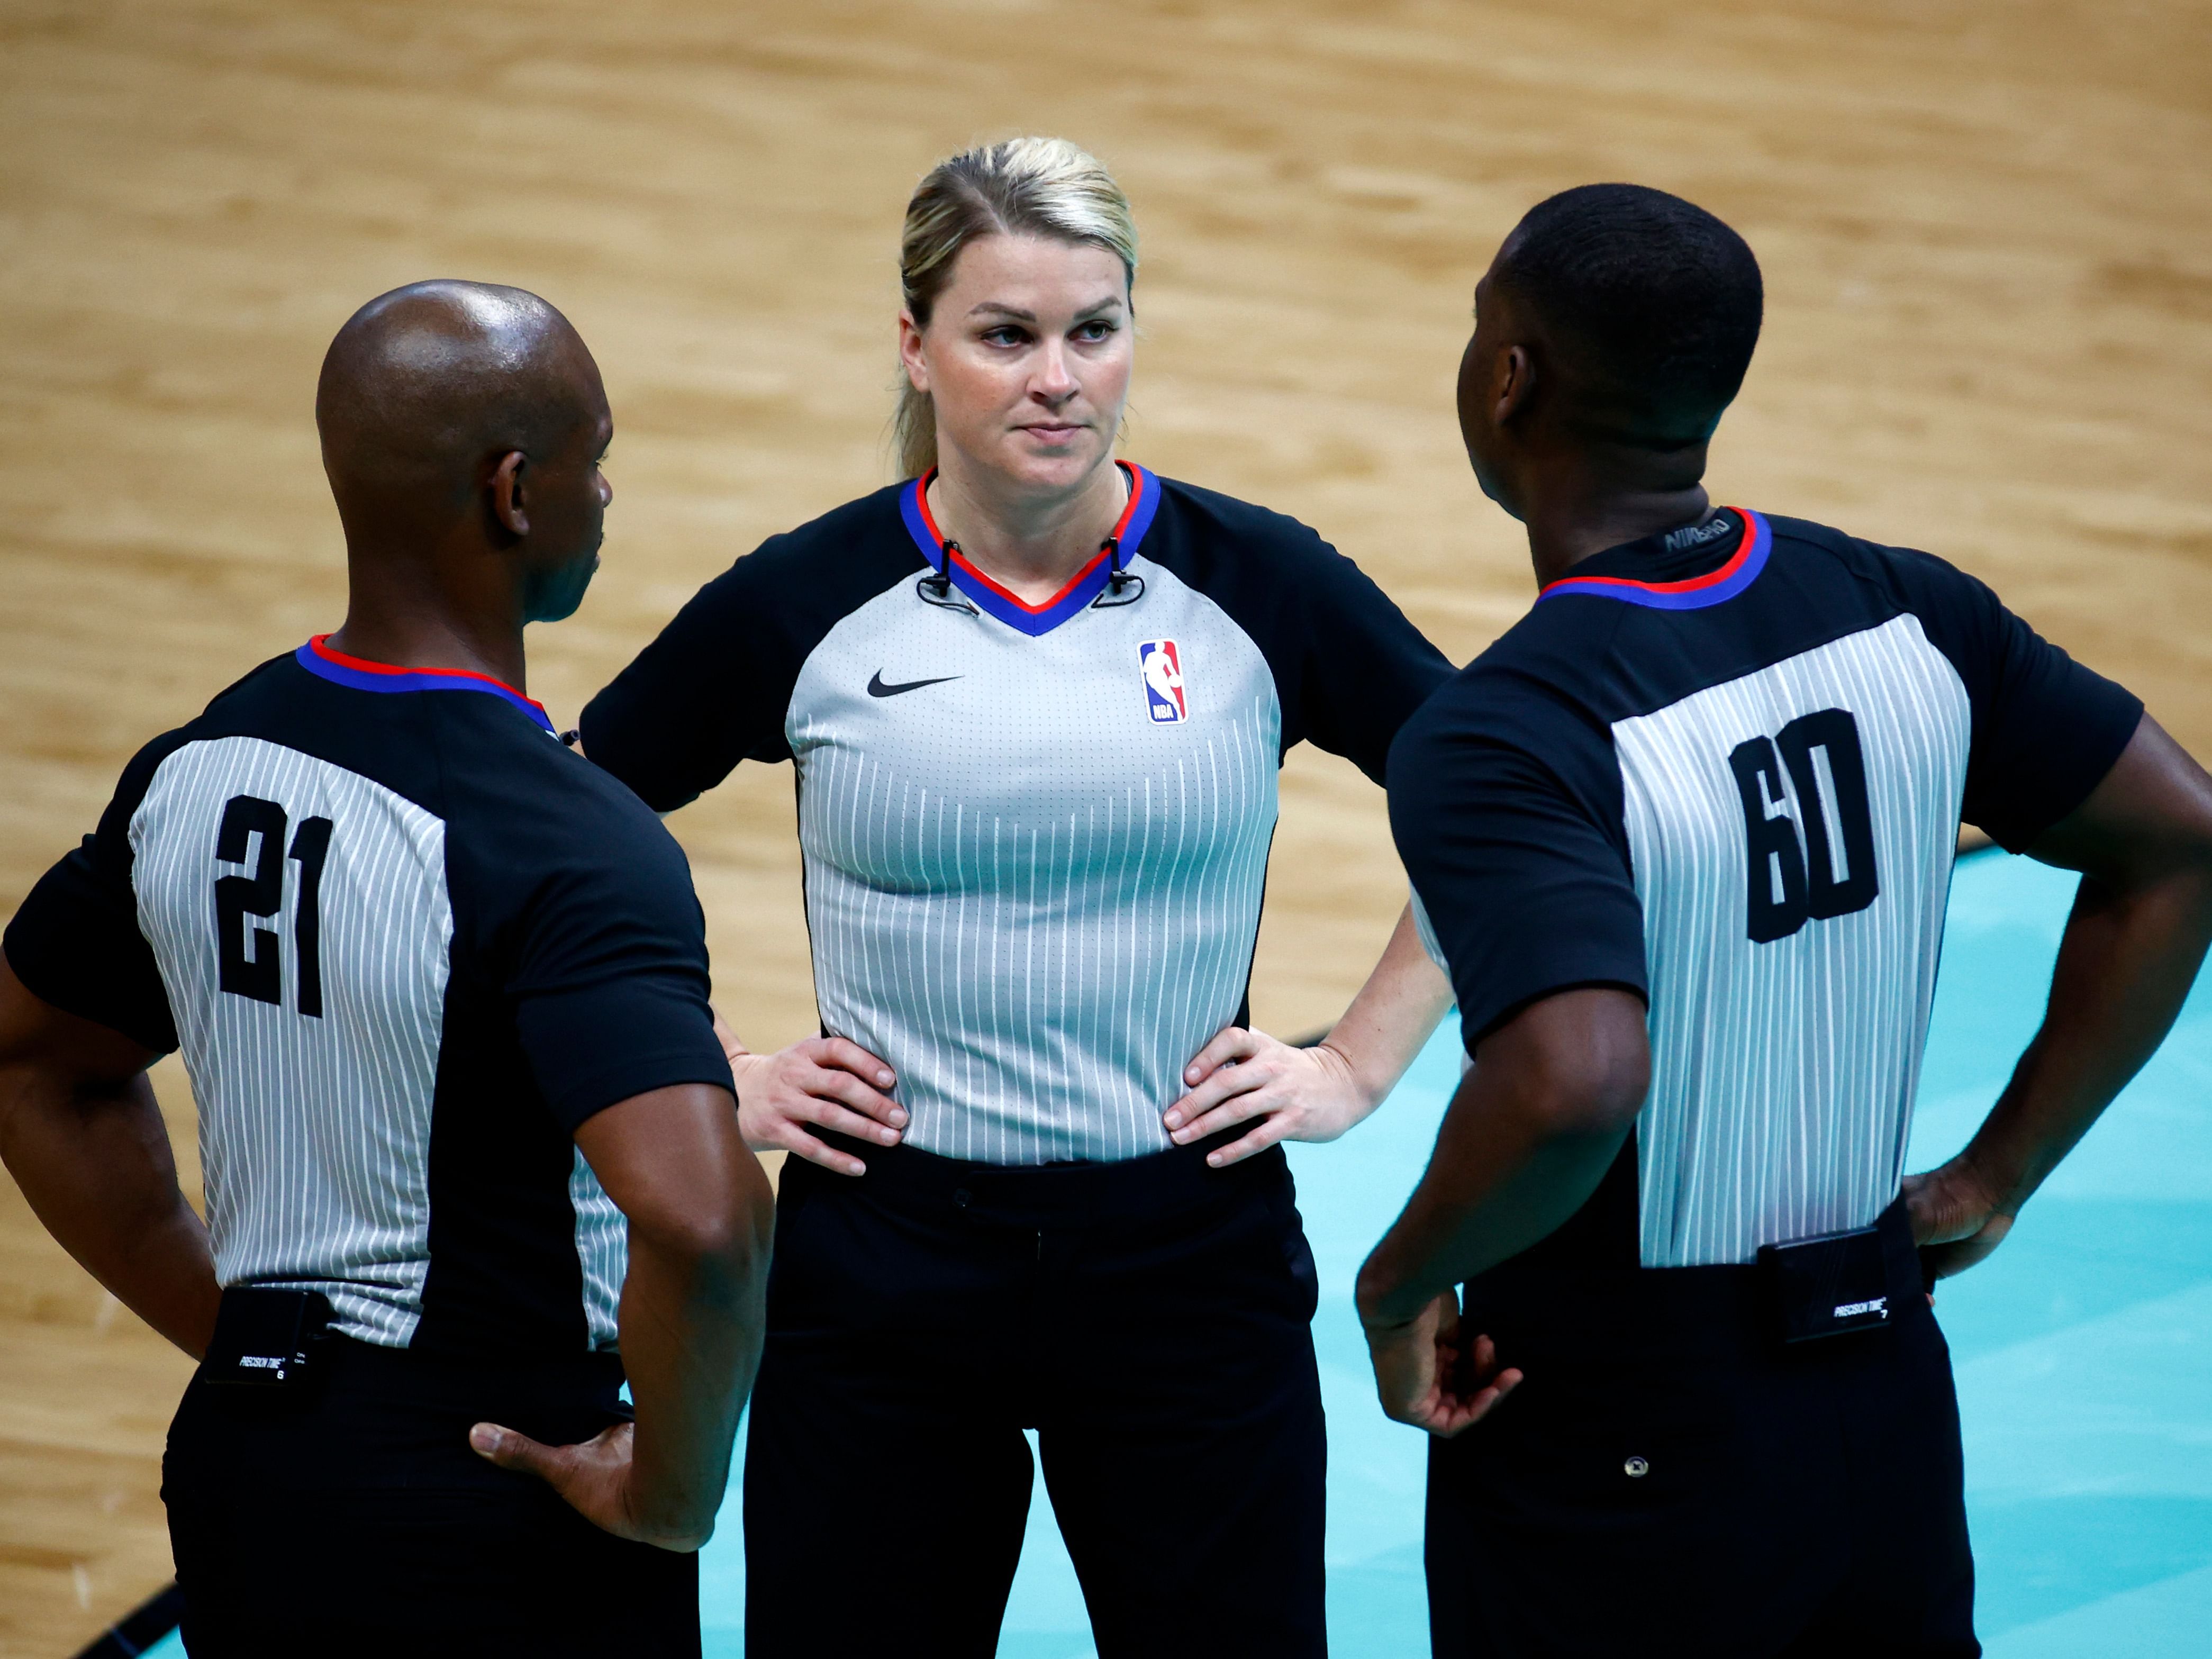 NBA referees during a game between the Denver Nuggets and Charlotte Hornets